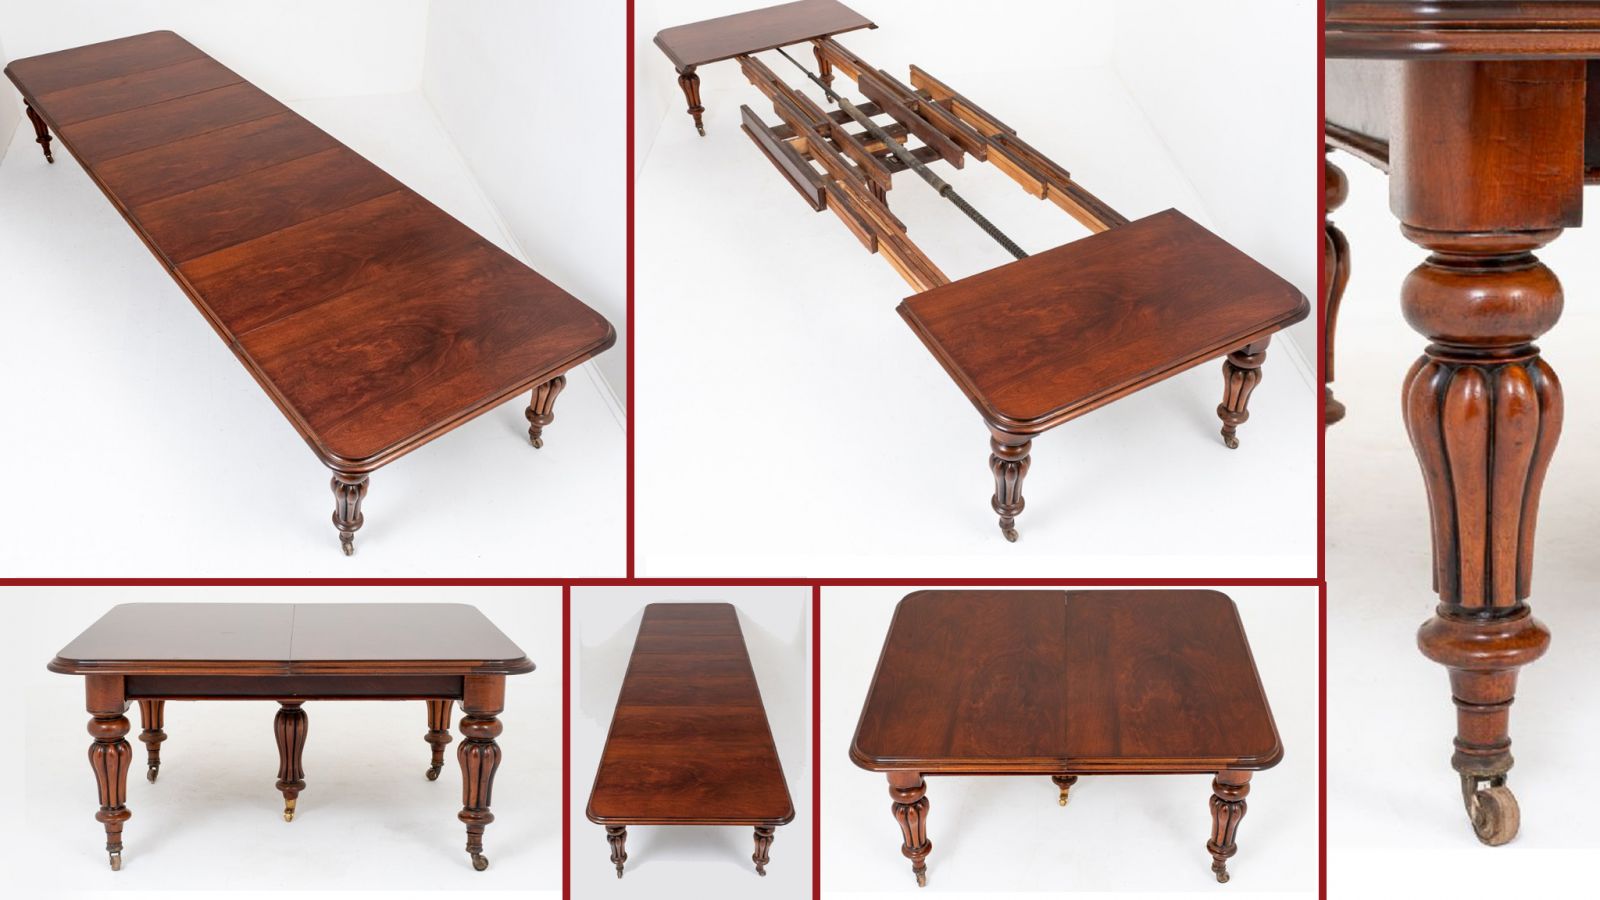 Antique Dining Table - William IV Extending Mahogany Diner